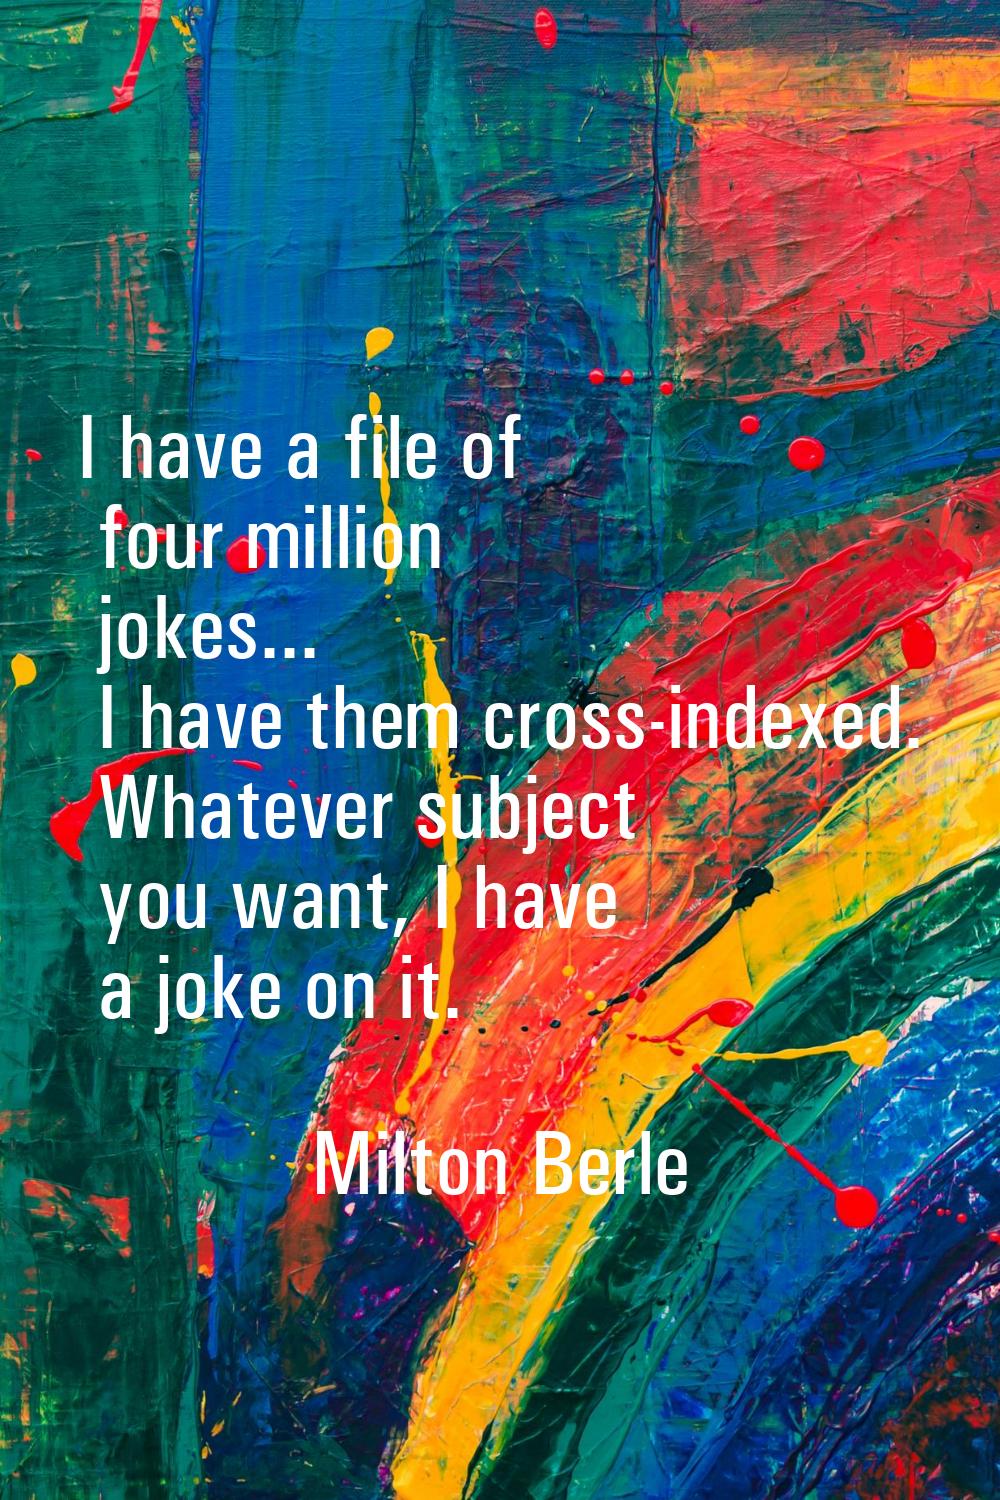 I have a file of four million jokes... I have them cross-indexed. Whatever subject you want, I have